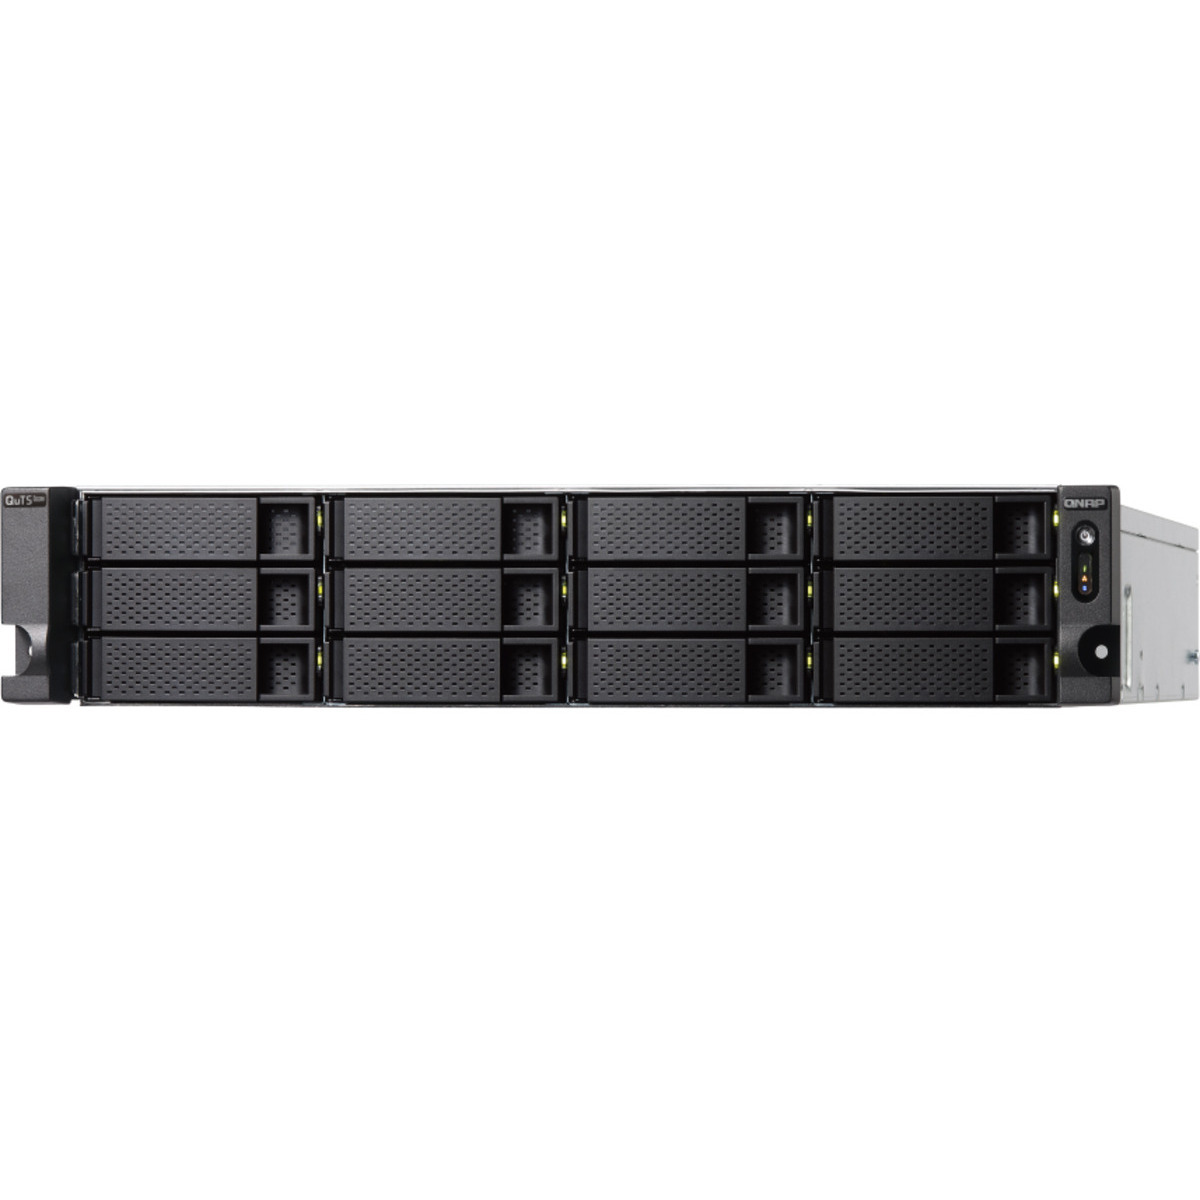 QNAP TS-h1886XU-RP R2 QuTS hero Edition RackMount 12+6-Bay Large Business / Enterprise NAS - Network Attached Storage Device Burn-In Tested Configurations TS-h1886XU-RP R2 QuTS hero Edition